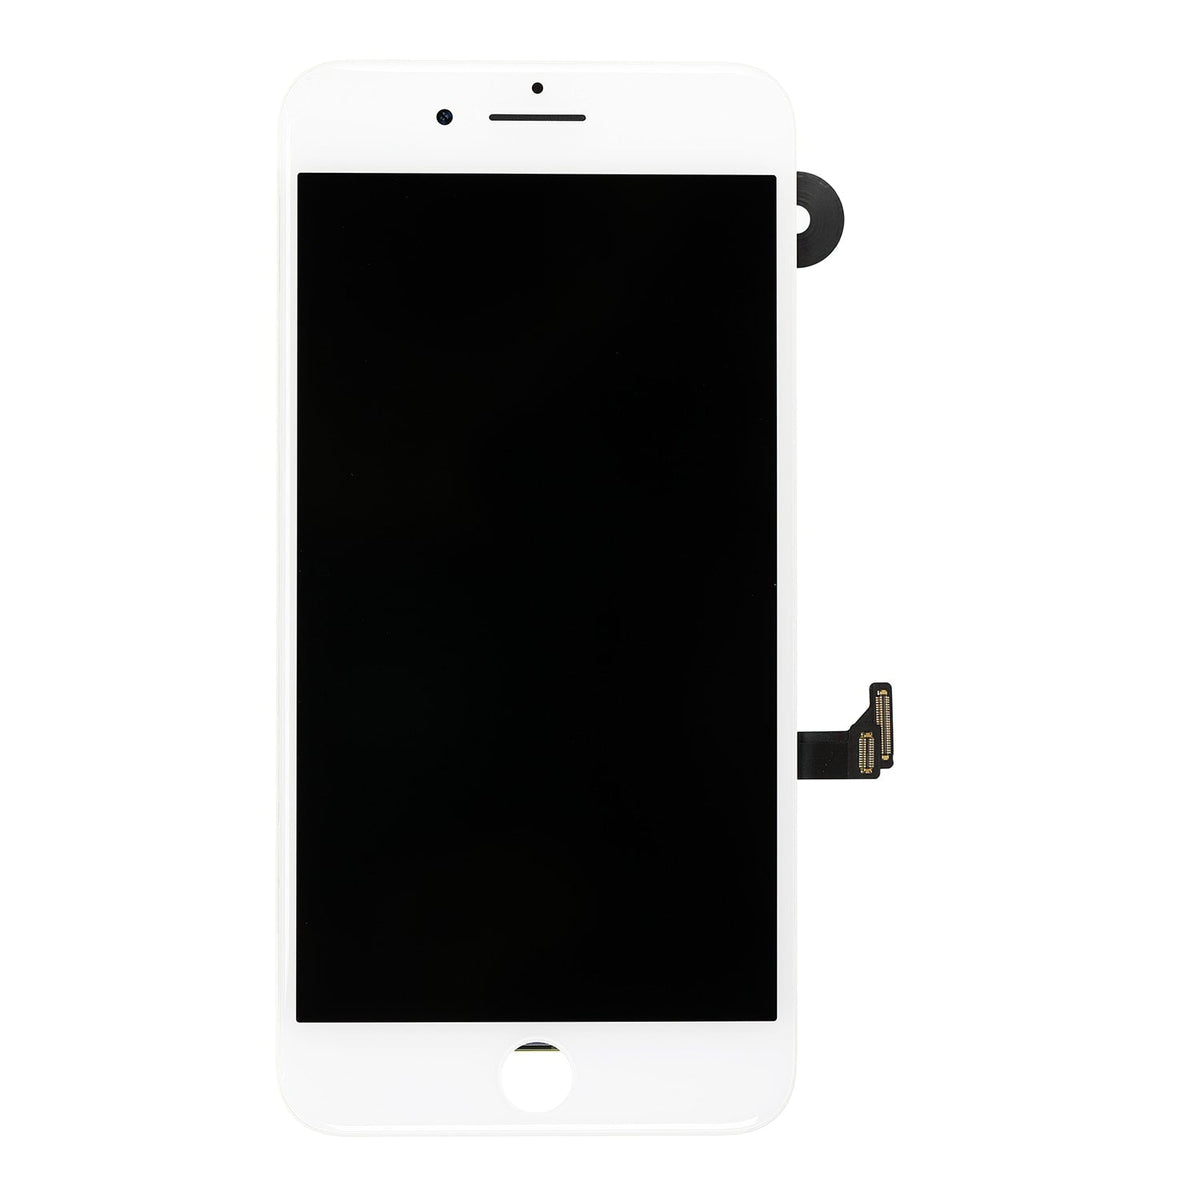 iPhone 8 plus LCD screen replacement without home button 